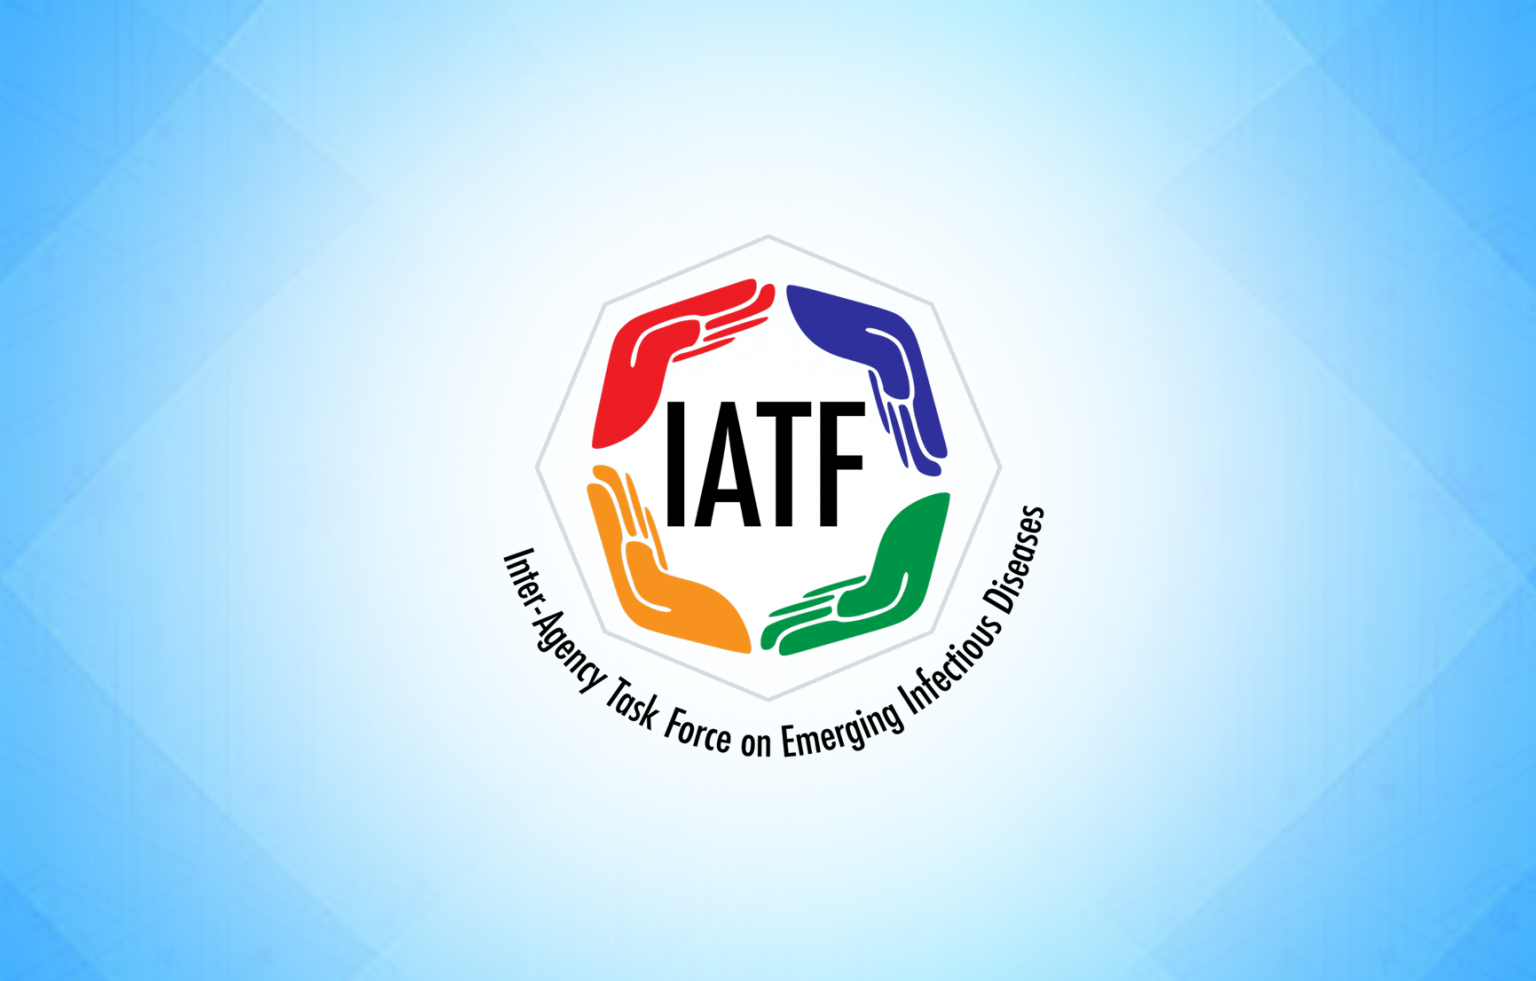 IATF approves the Philippine National Vaccination Program and